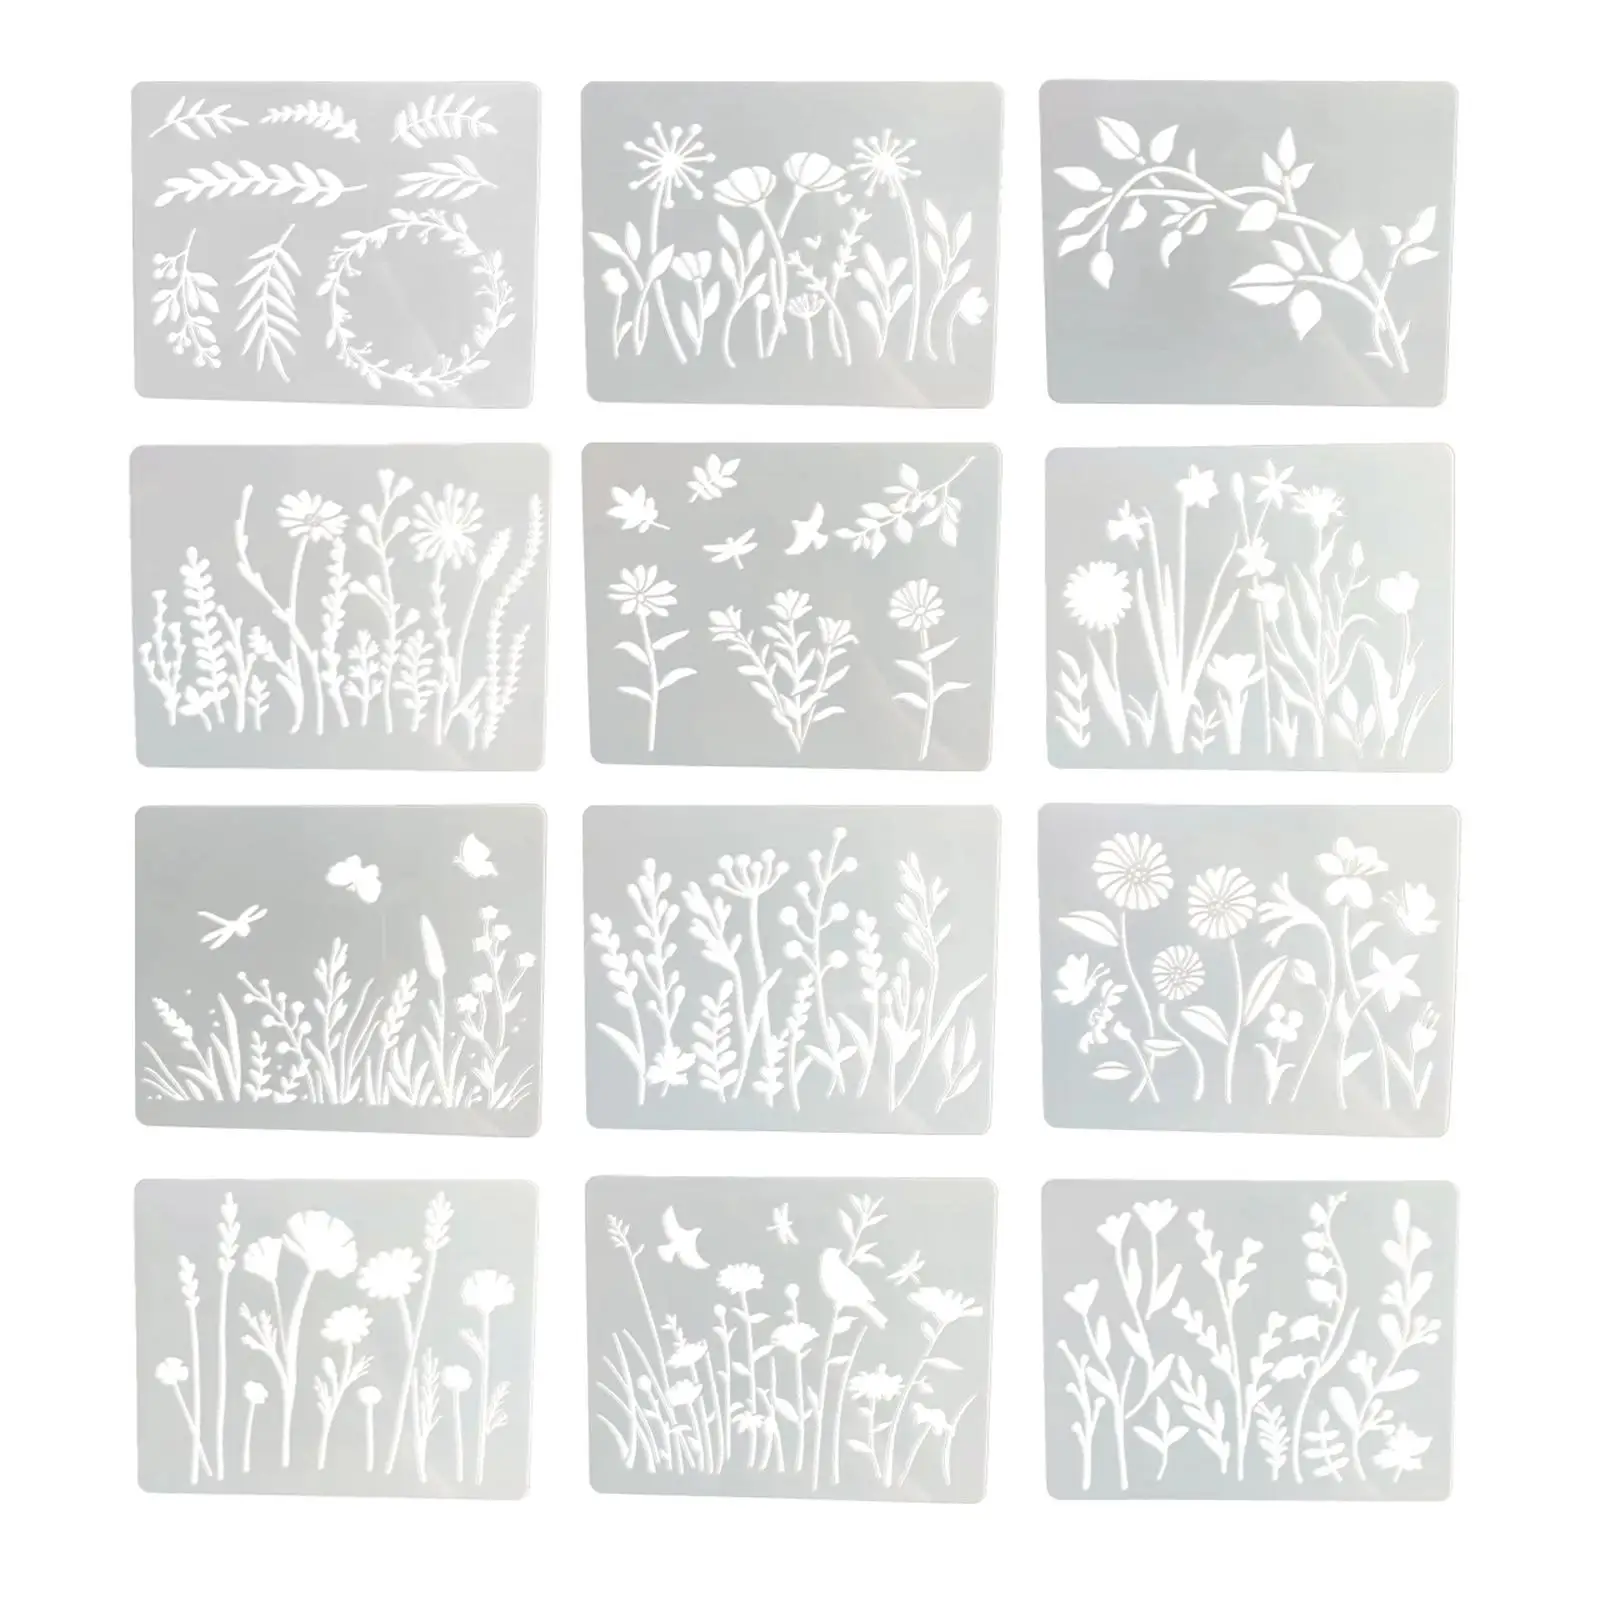 12x Resin Flower Stencil Template Scrapbook Painting Drawing Floral Decorative Spring Summer Ruler for Fabric Wood Canvas Album